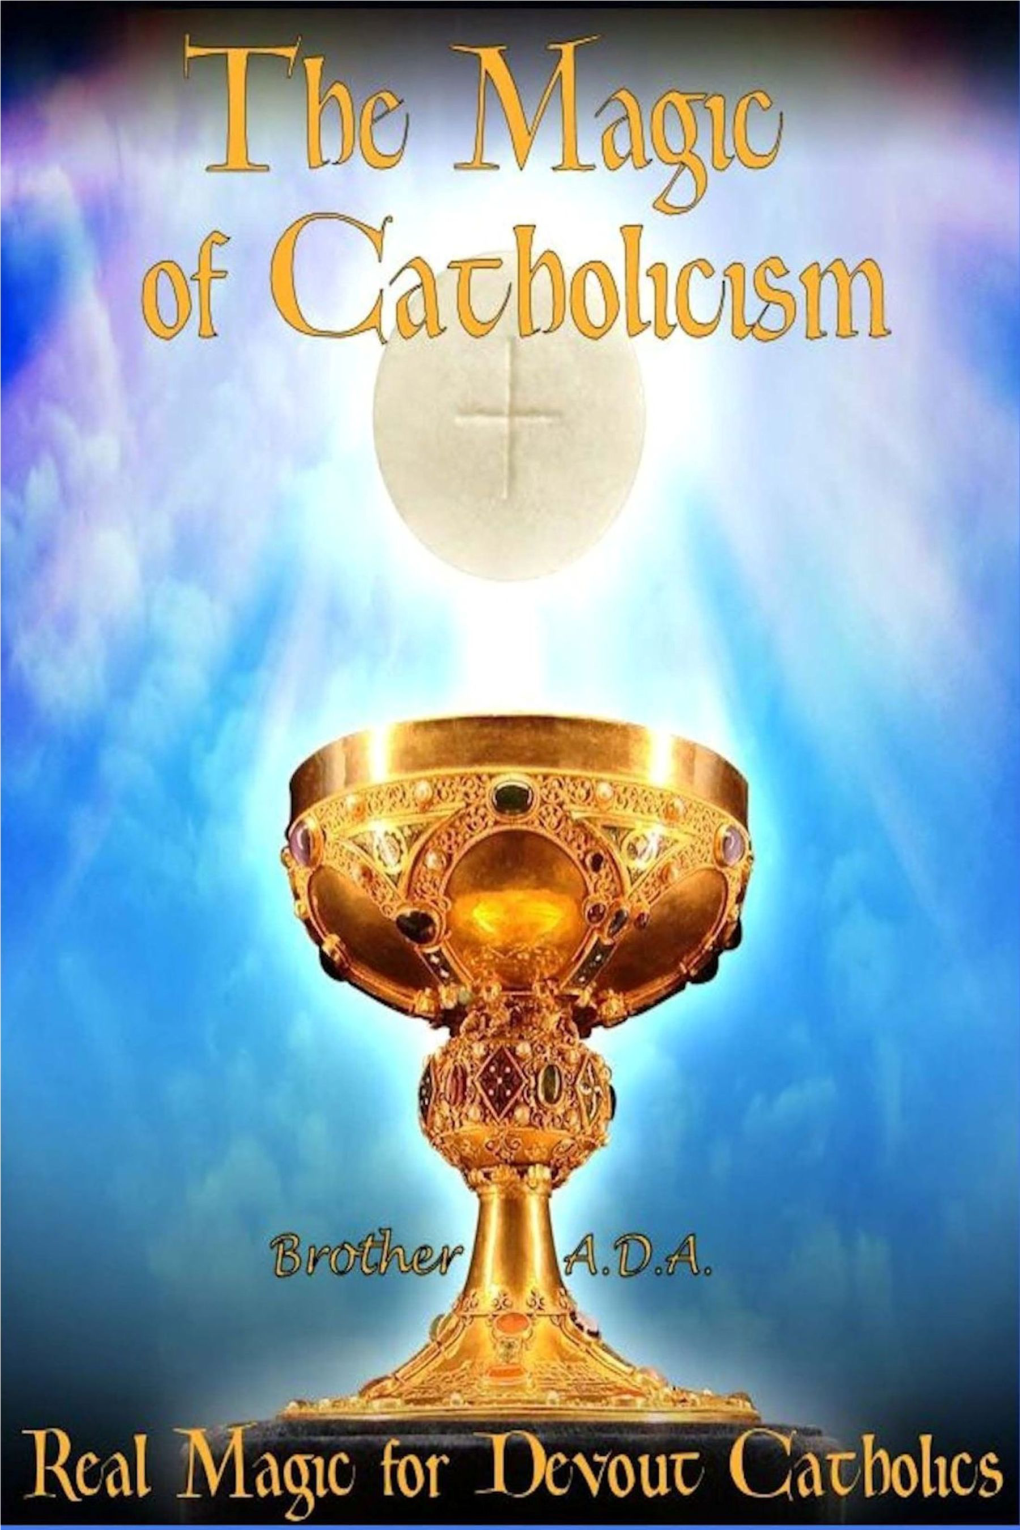 The Magic of Catholicism, © 2015 Brother A.D.A